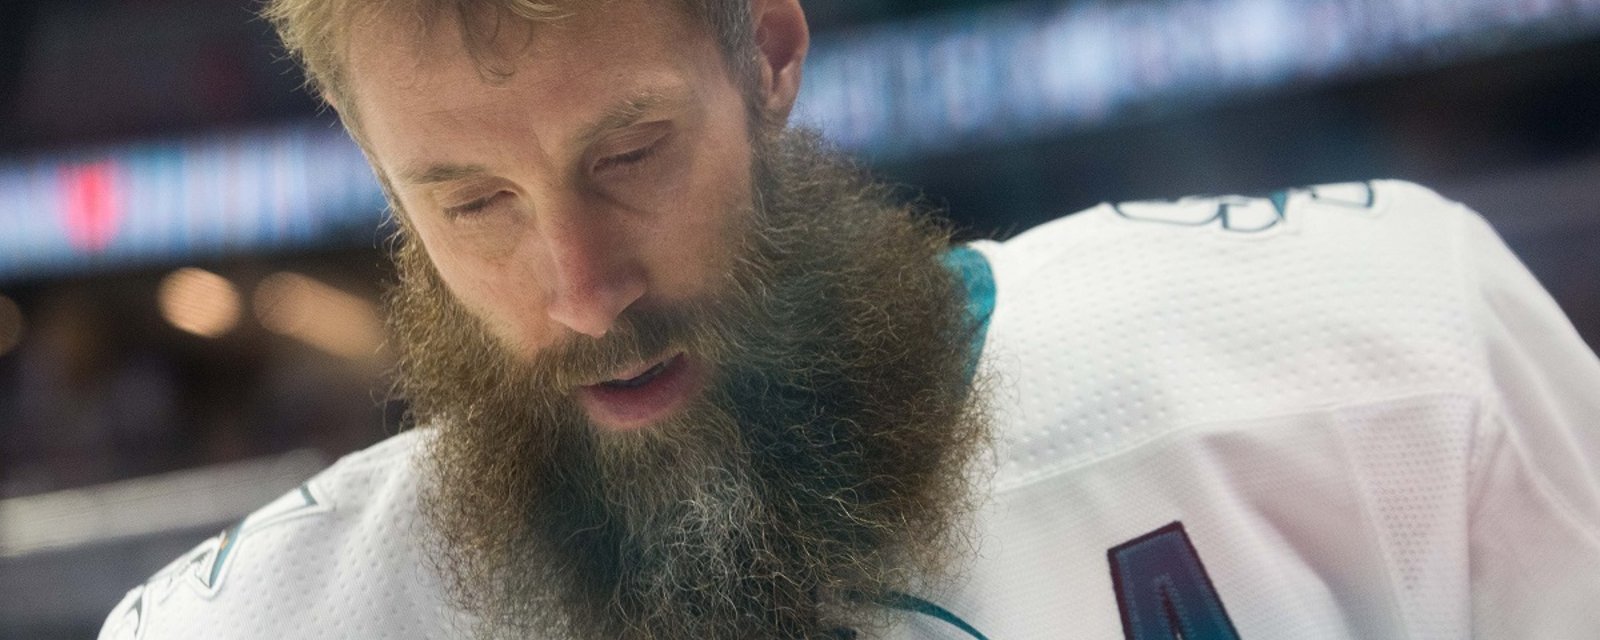 Joe Thornton's National League training suspended due to COVID-19.